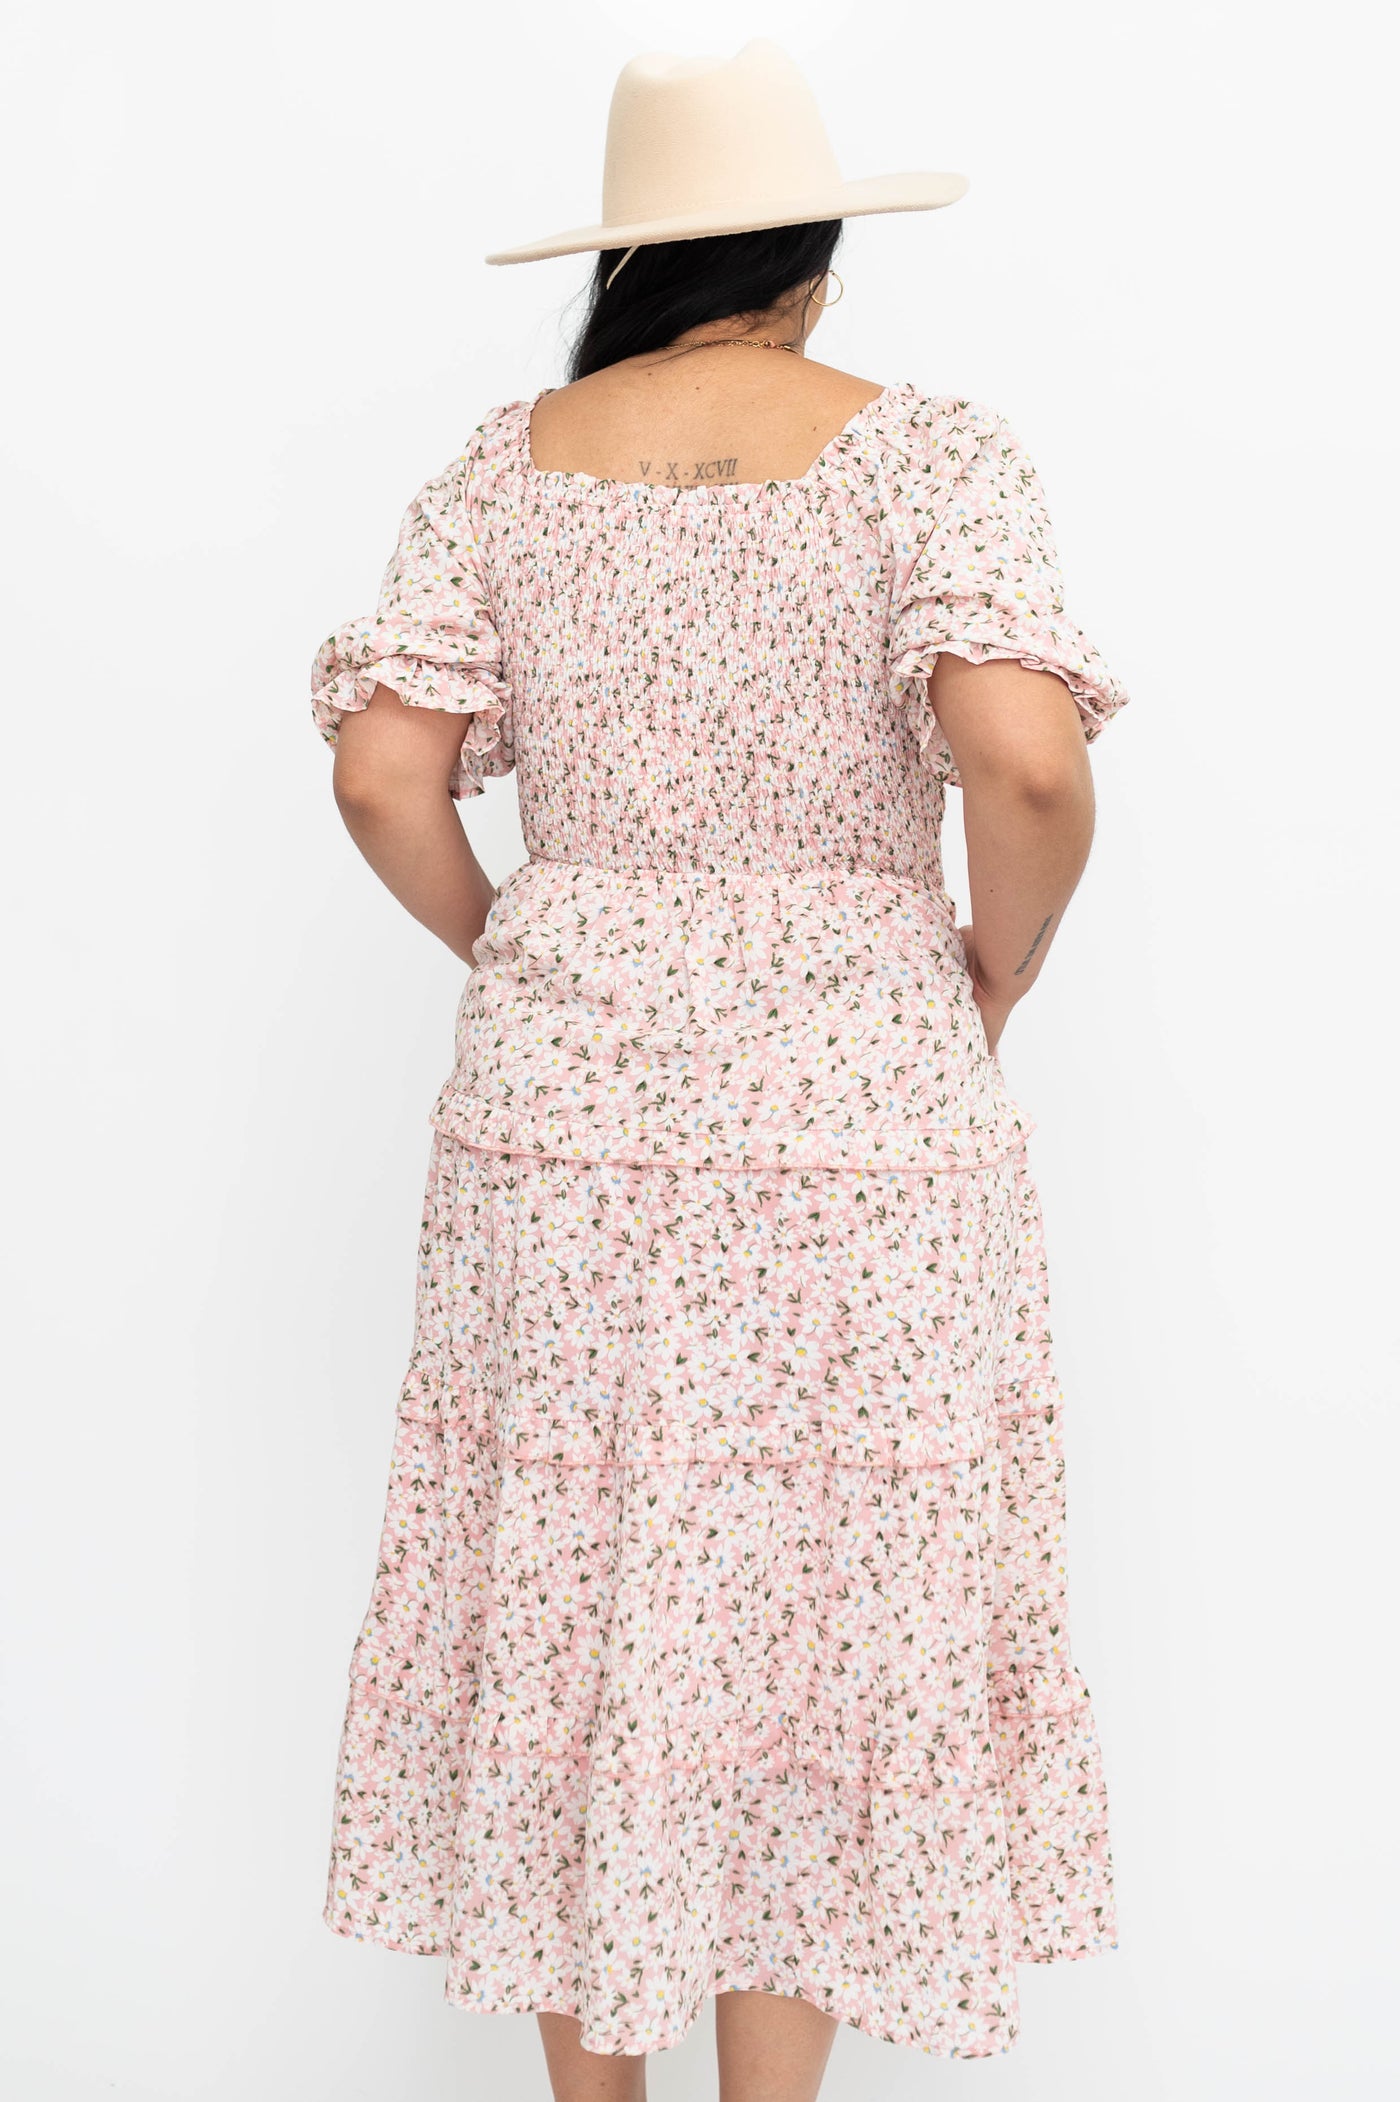 Back view of a pick floral dress